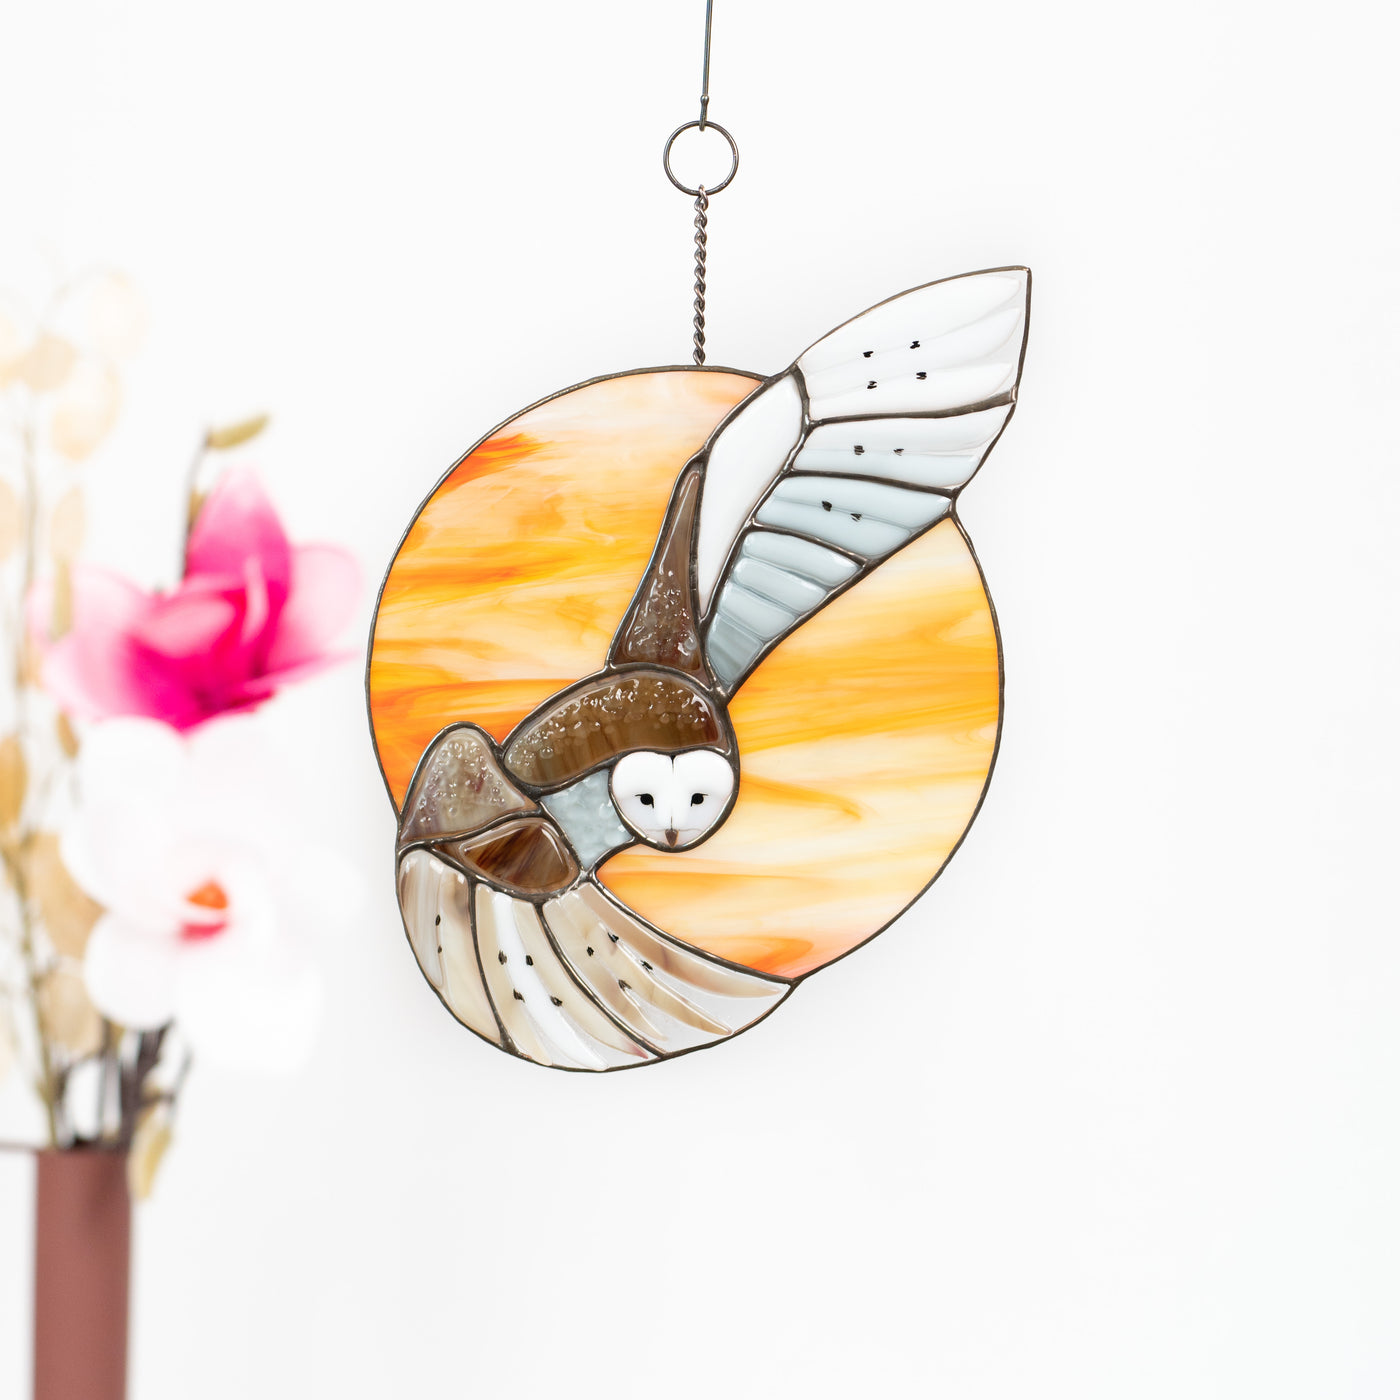 Barn owl window hanging of fused stained glass